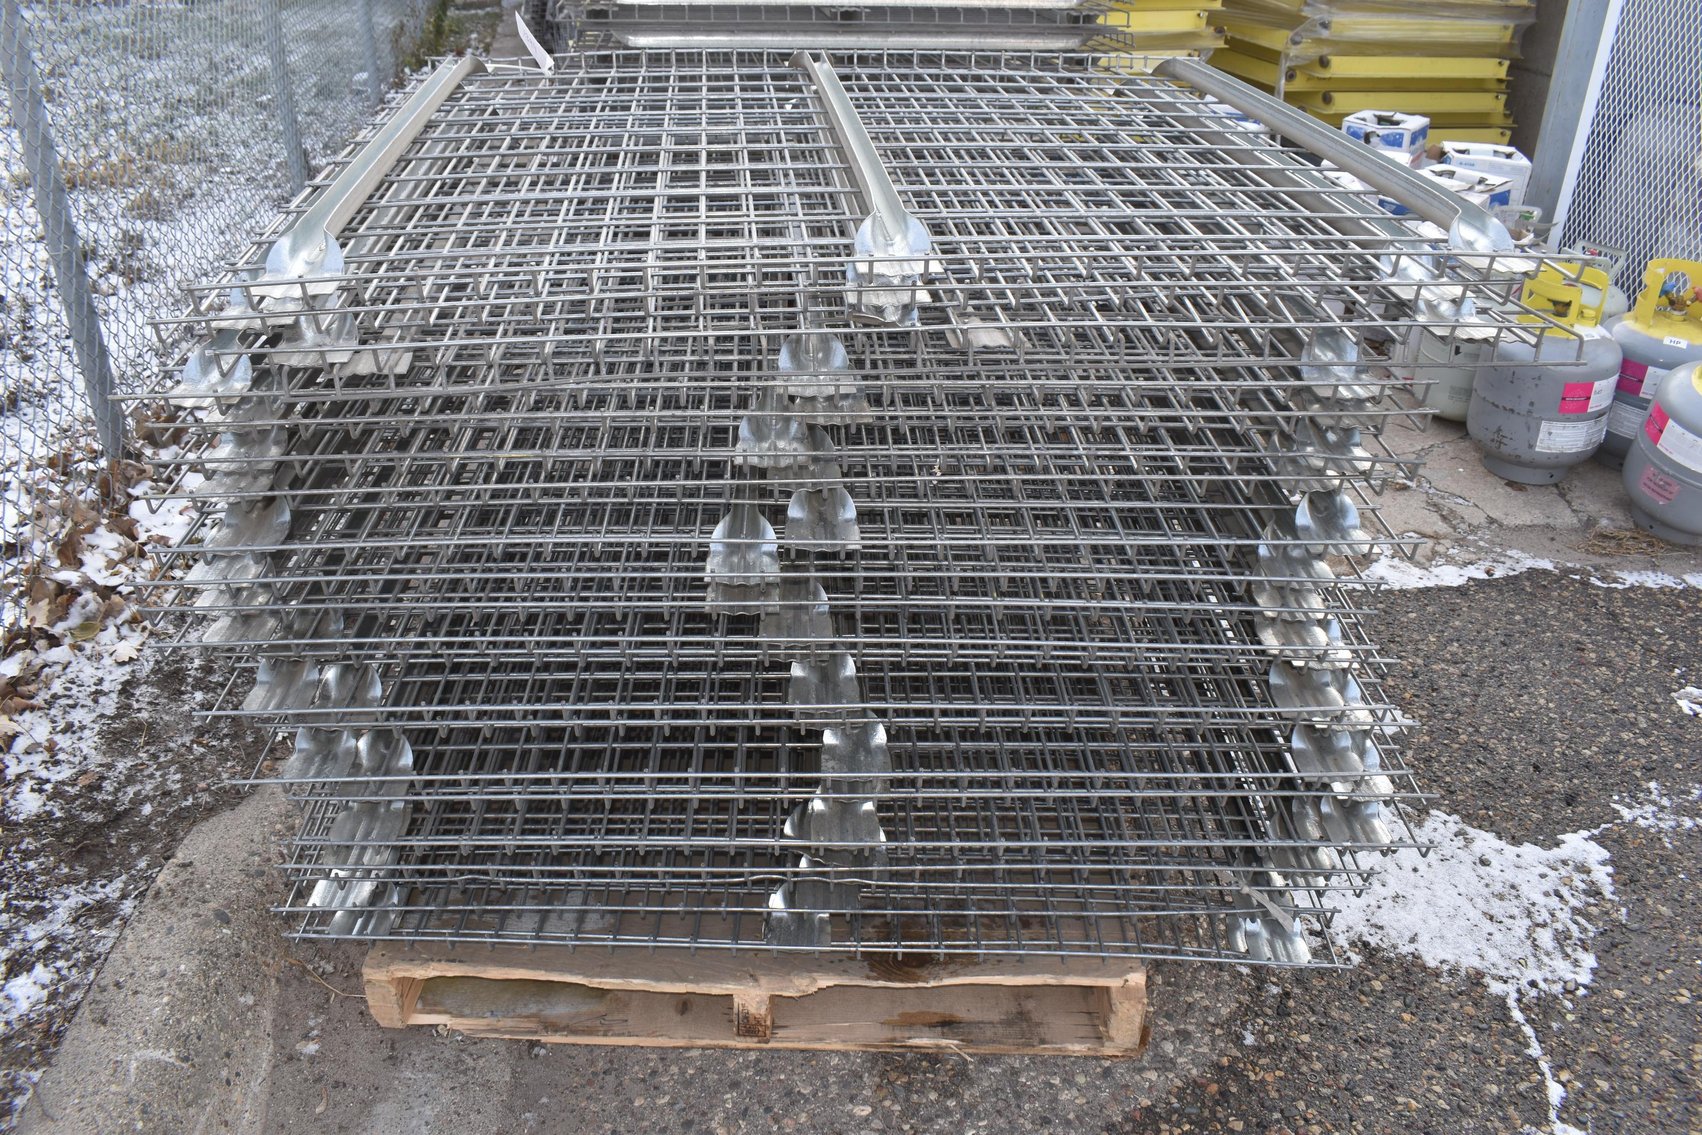 Pallet Racking: Uprights, Crossbeams & Wire Grates